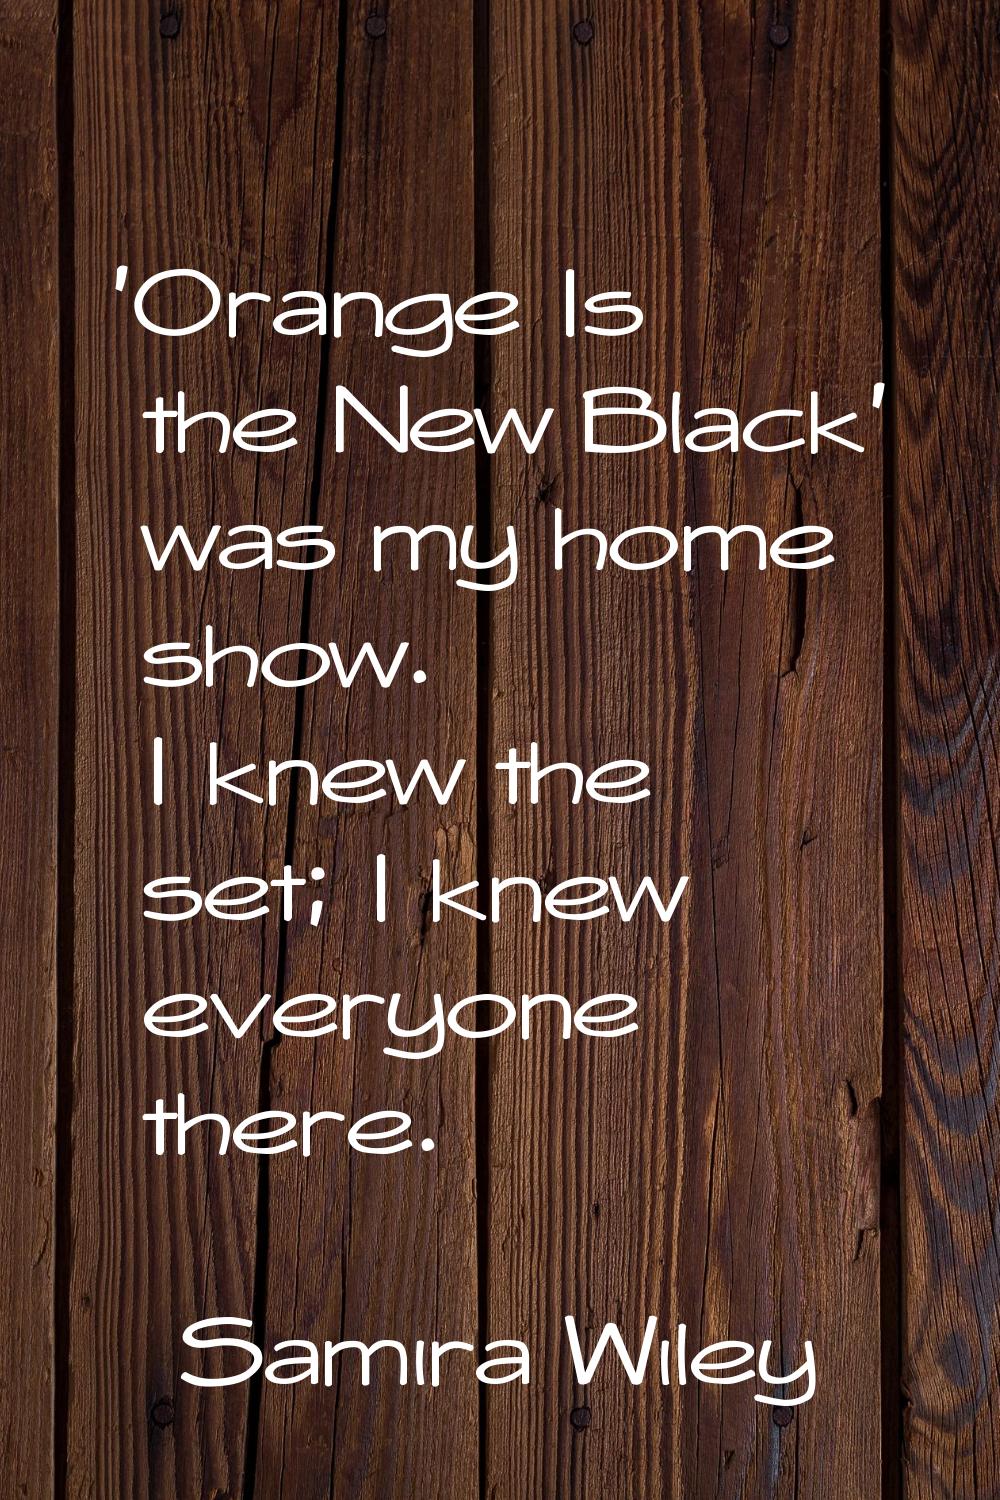 'Orange Is the New Black' was my home show. I knew the set; I knew everyone there.